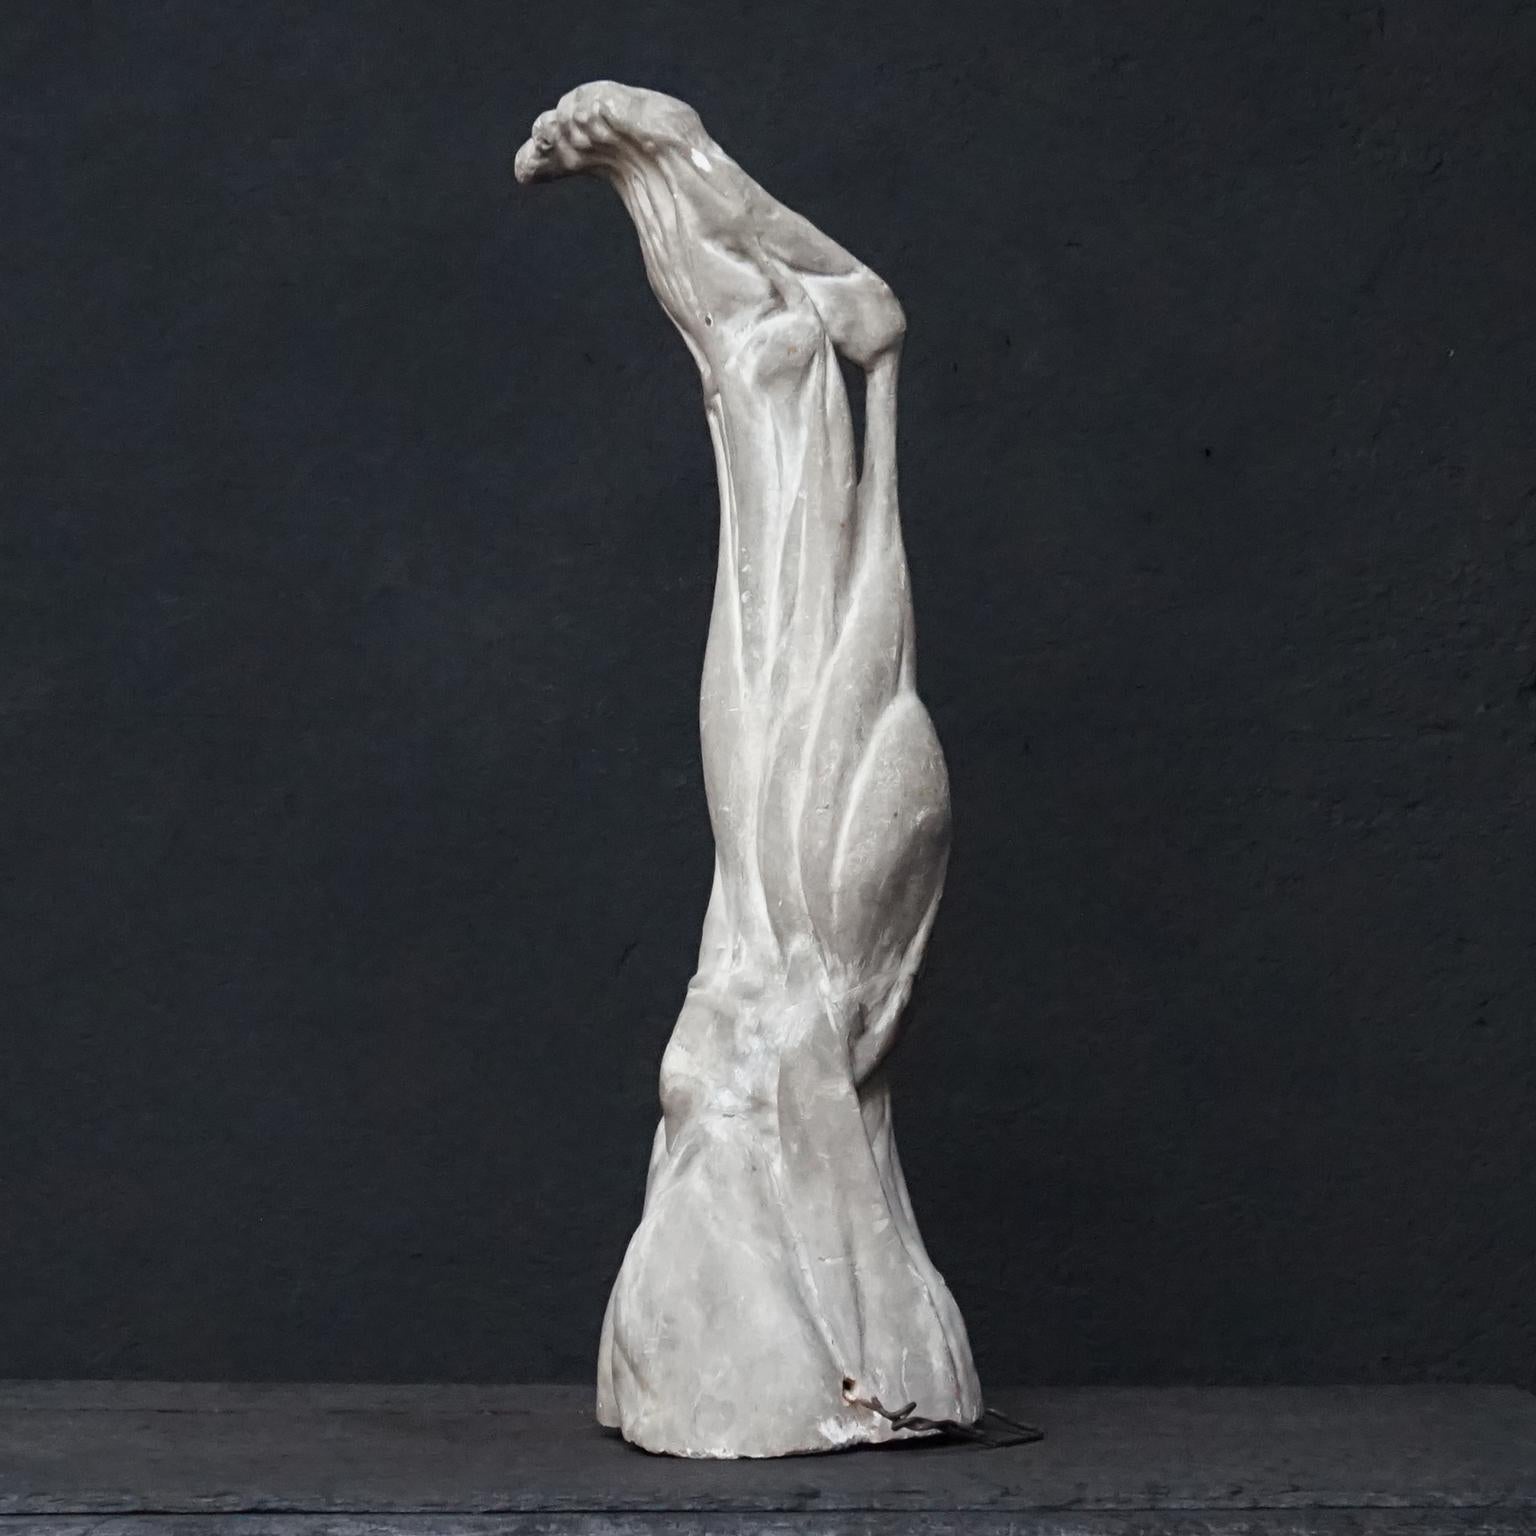 Cast 19th Century Plaster Muscle Study of Human Leg from the Rijksacademie, Amsterdam